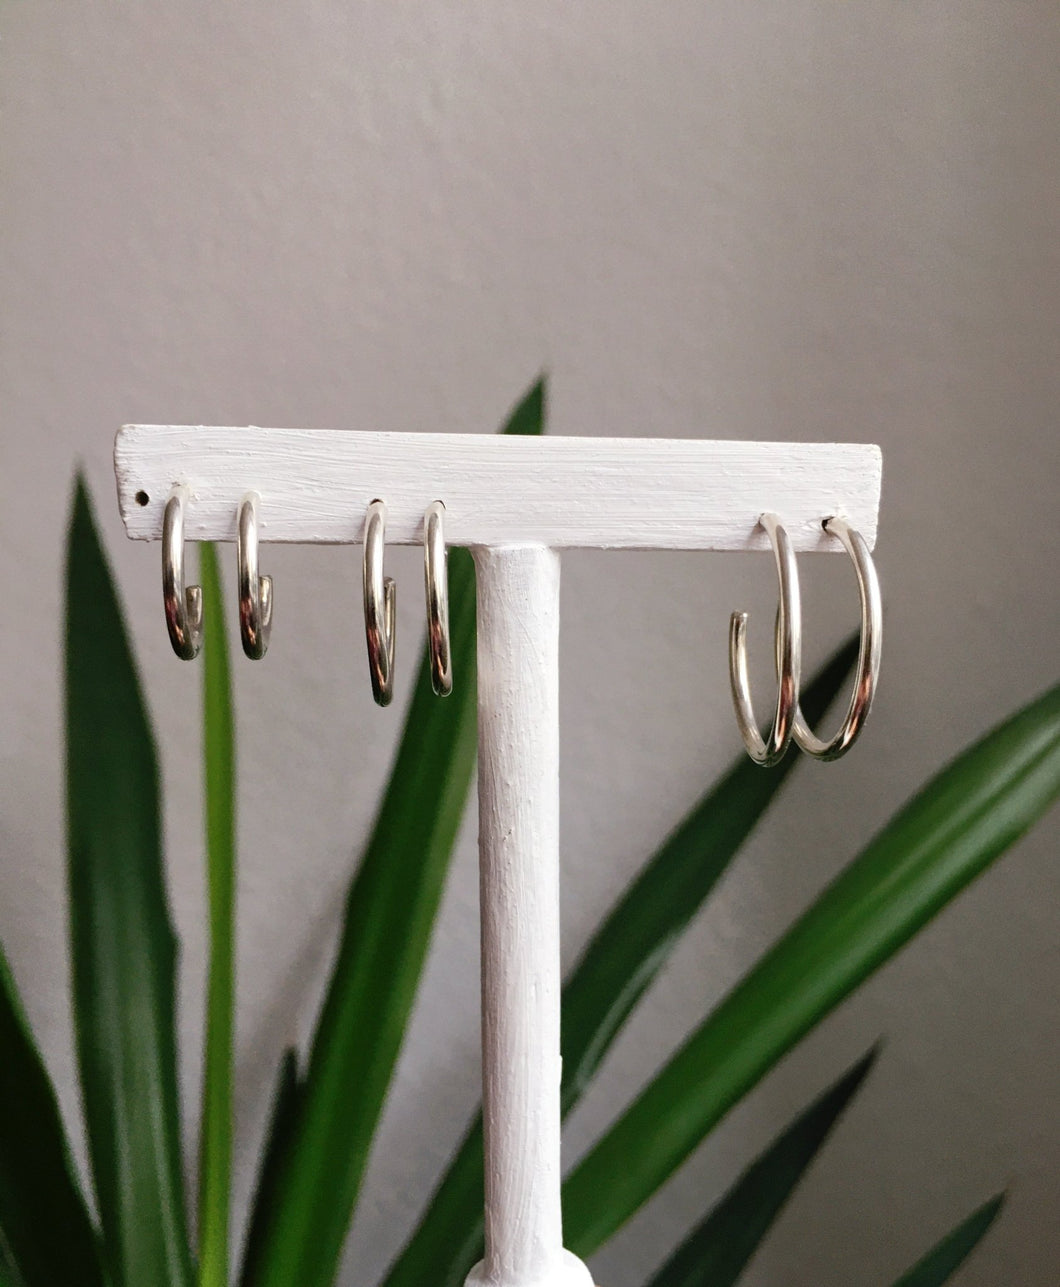 Three Kathrin Jona silver hoop earrings on a stand next to a plant.